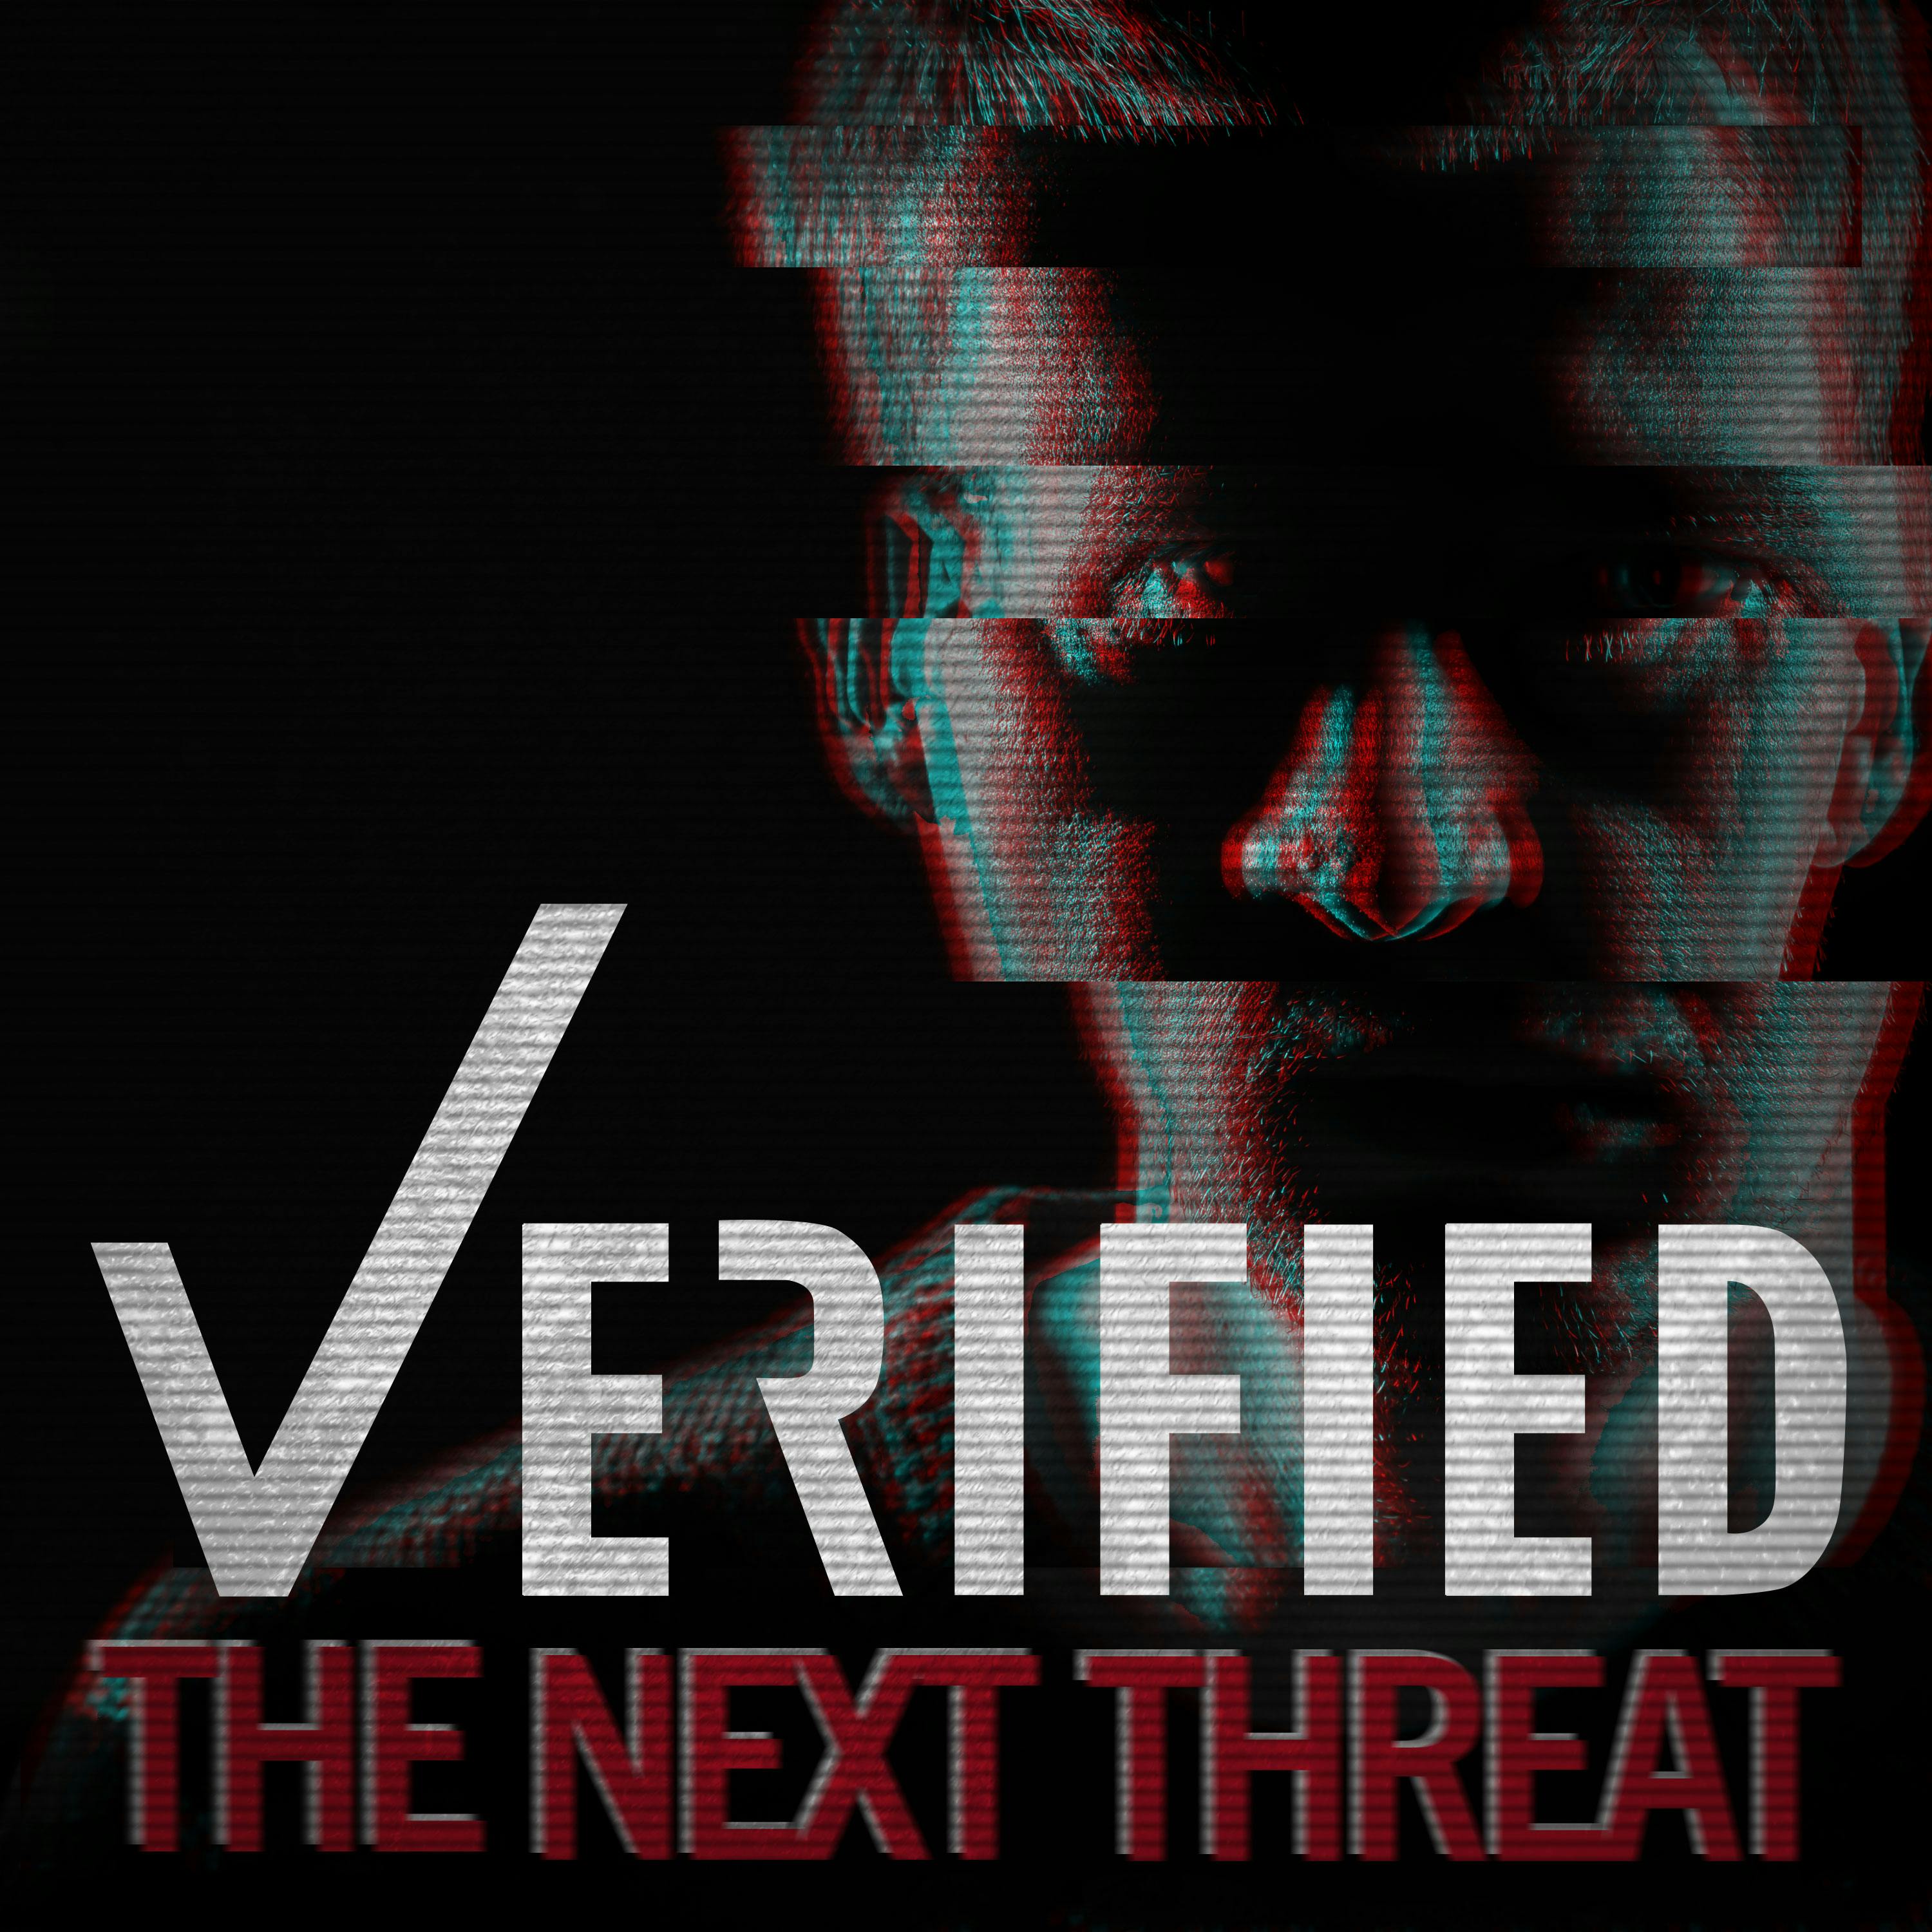 The Next Threat | E3 The Network